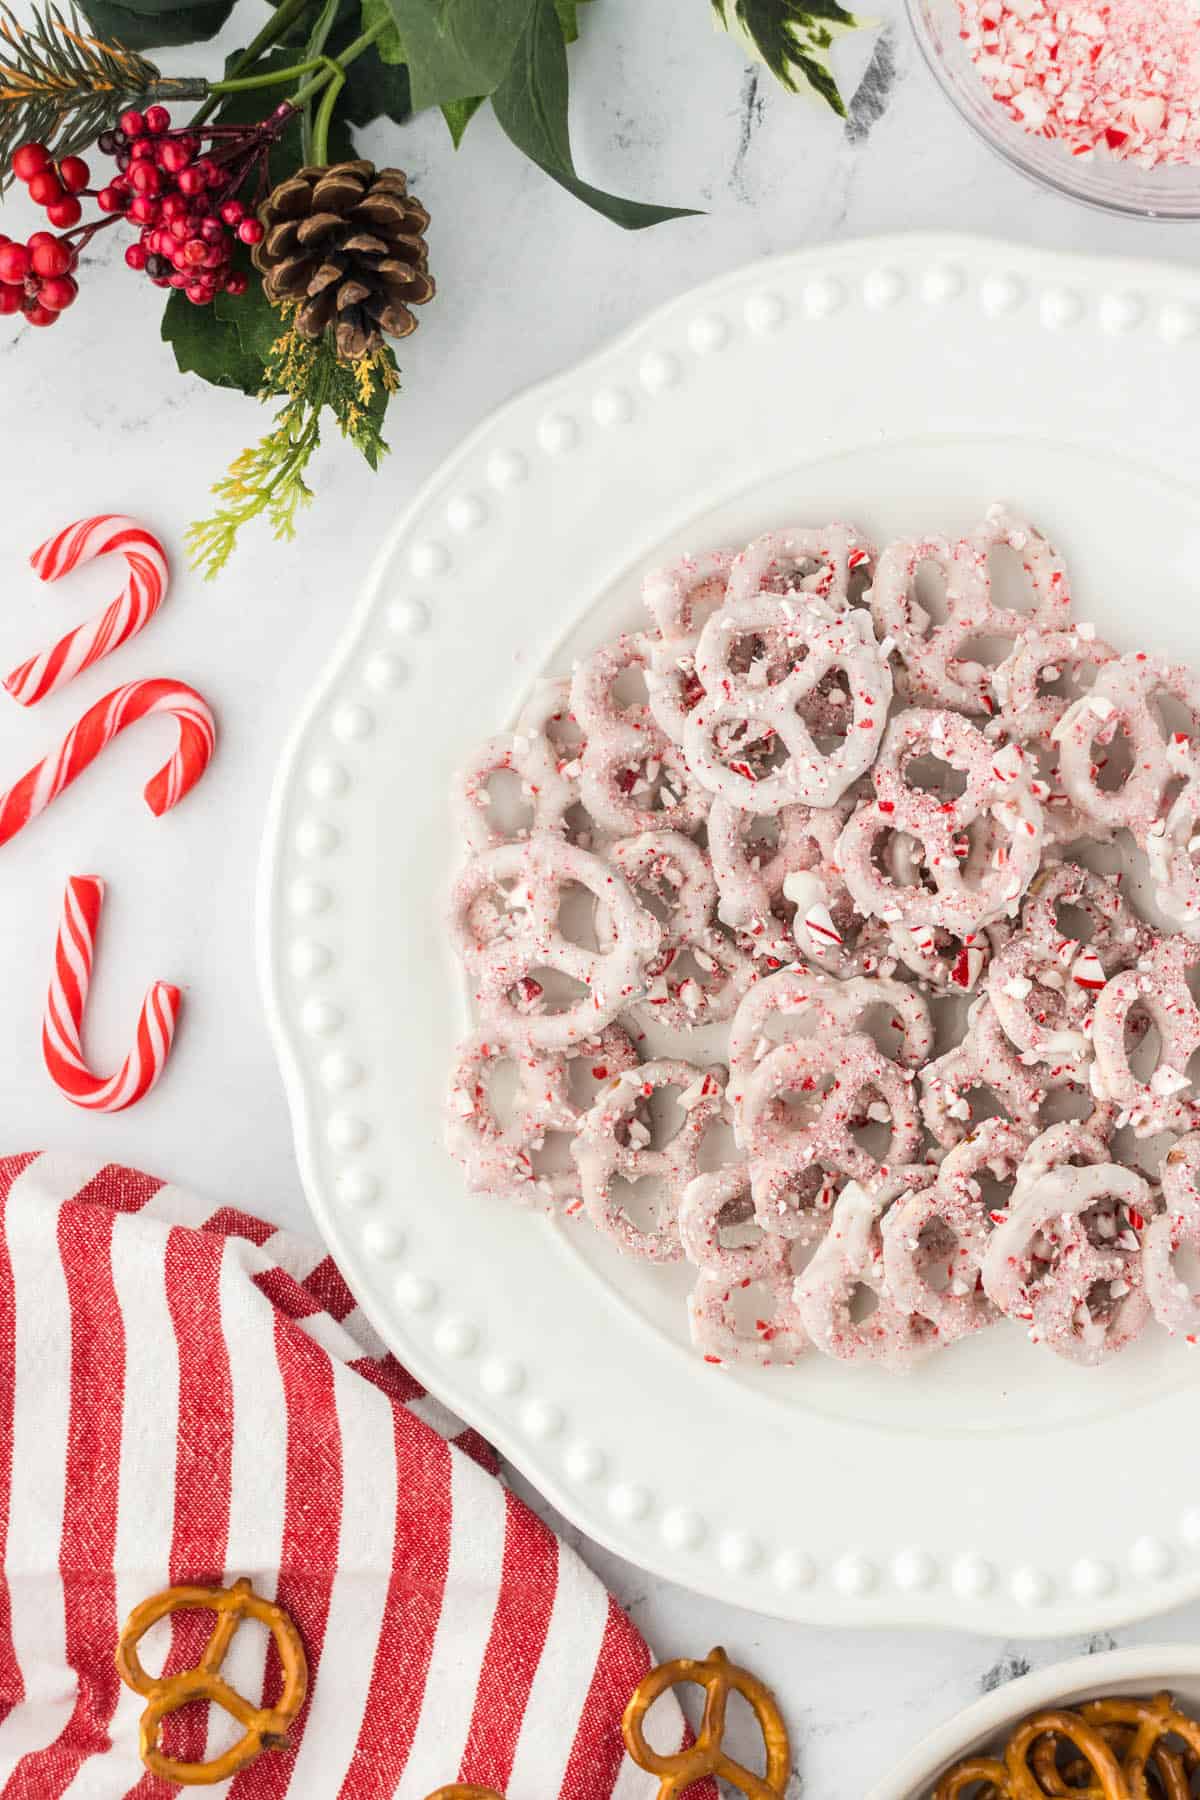 Platter filled with white chocolate pretzels sprinkled with crushed candy canes.